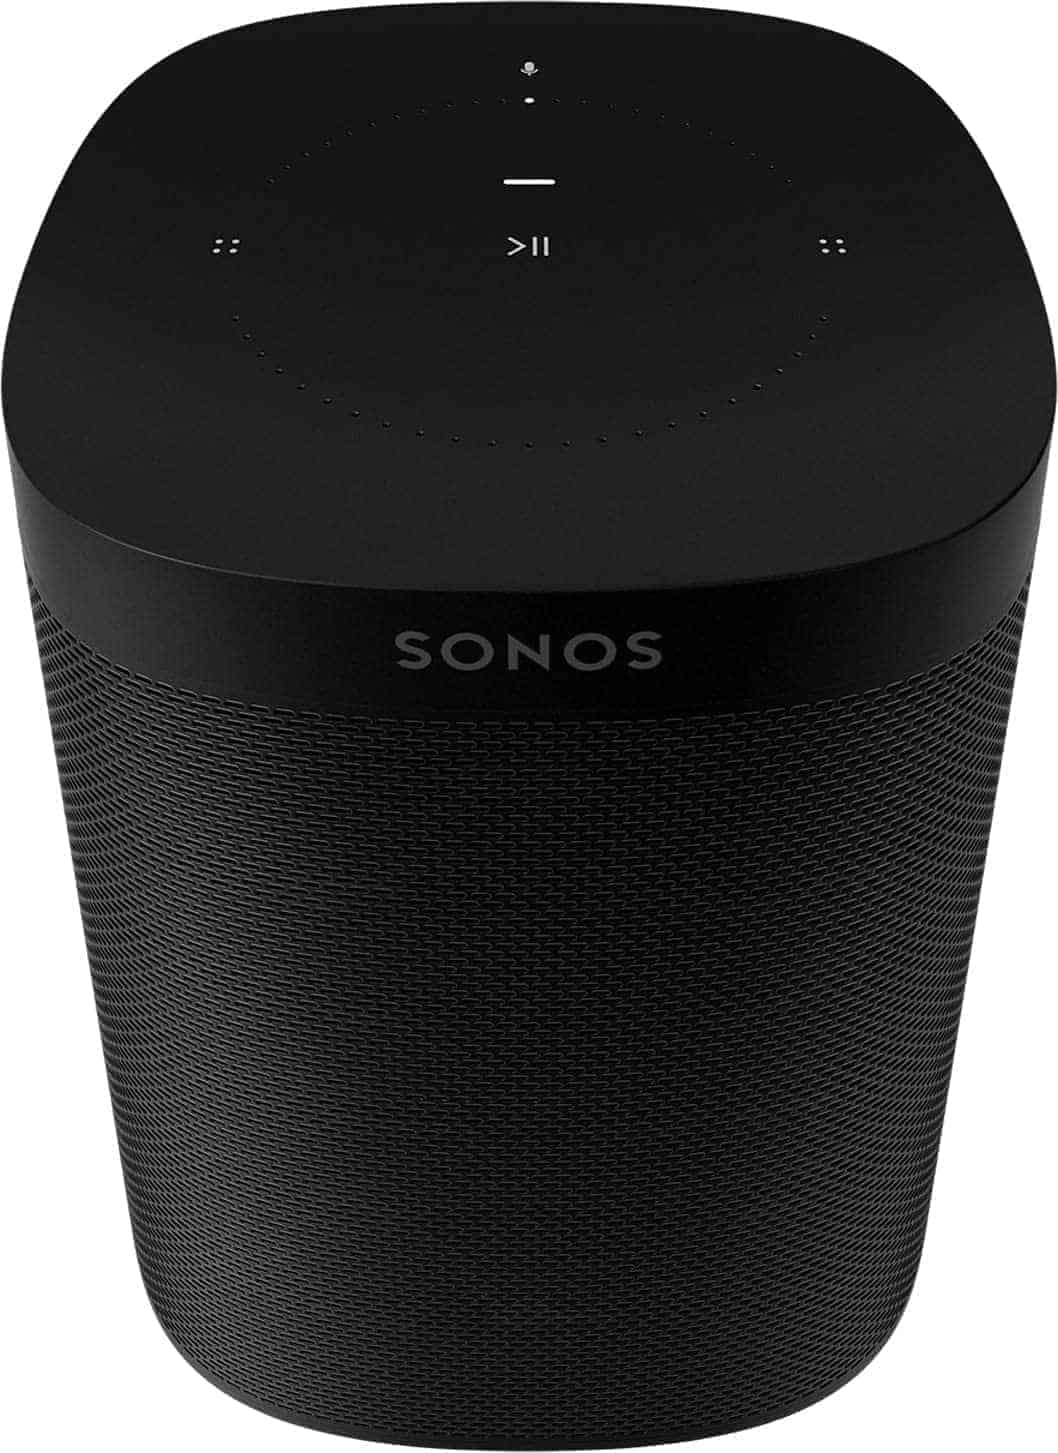 Sonos-Smart-Speaker-with-Alexa-Fathers-Day-Gift-Ideas